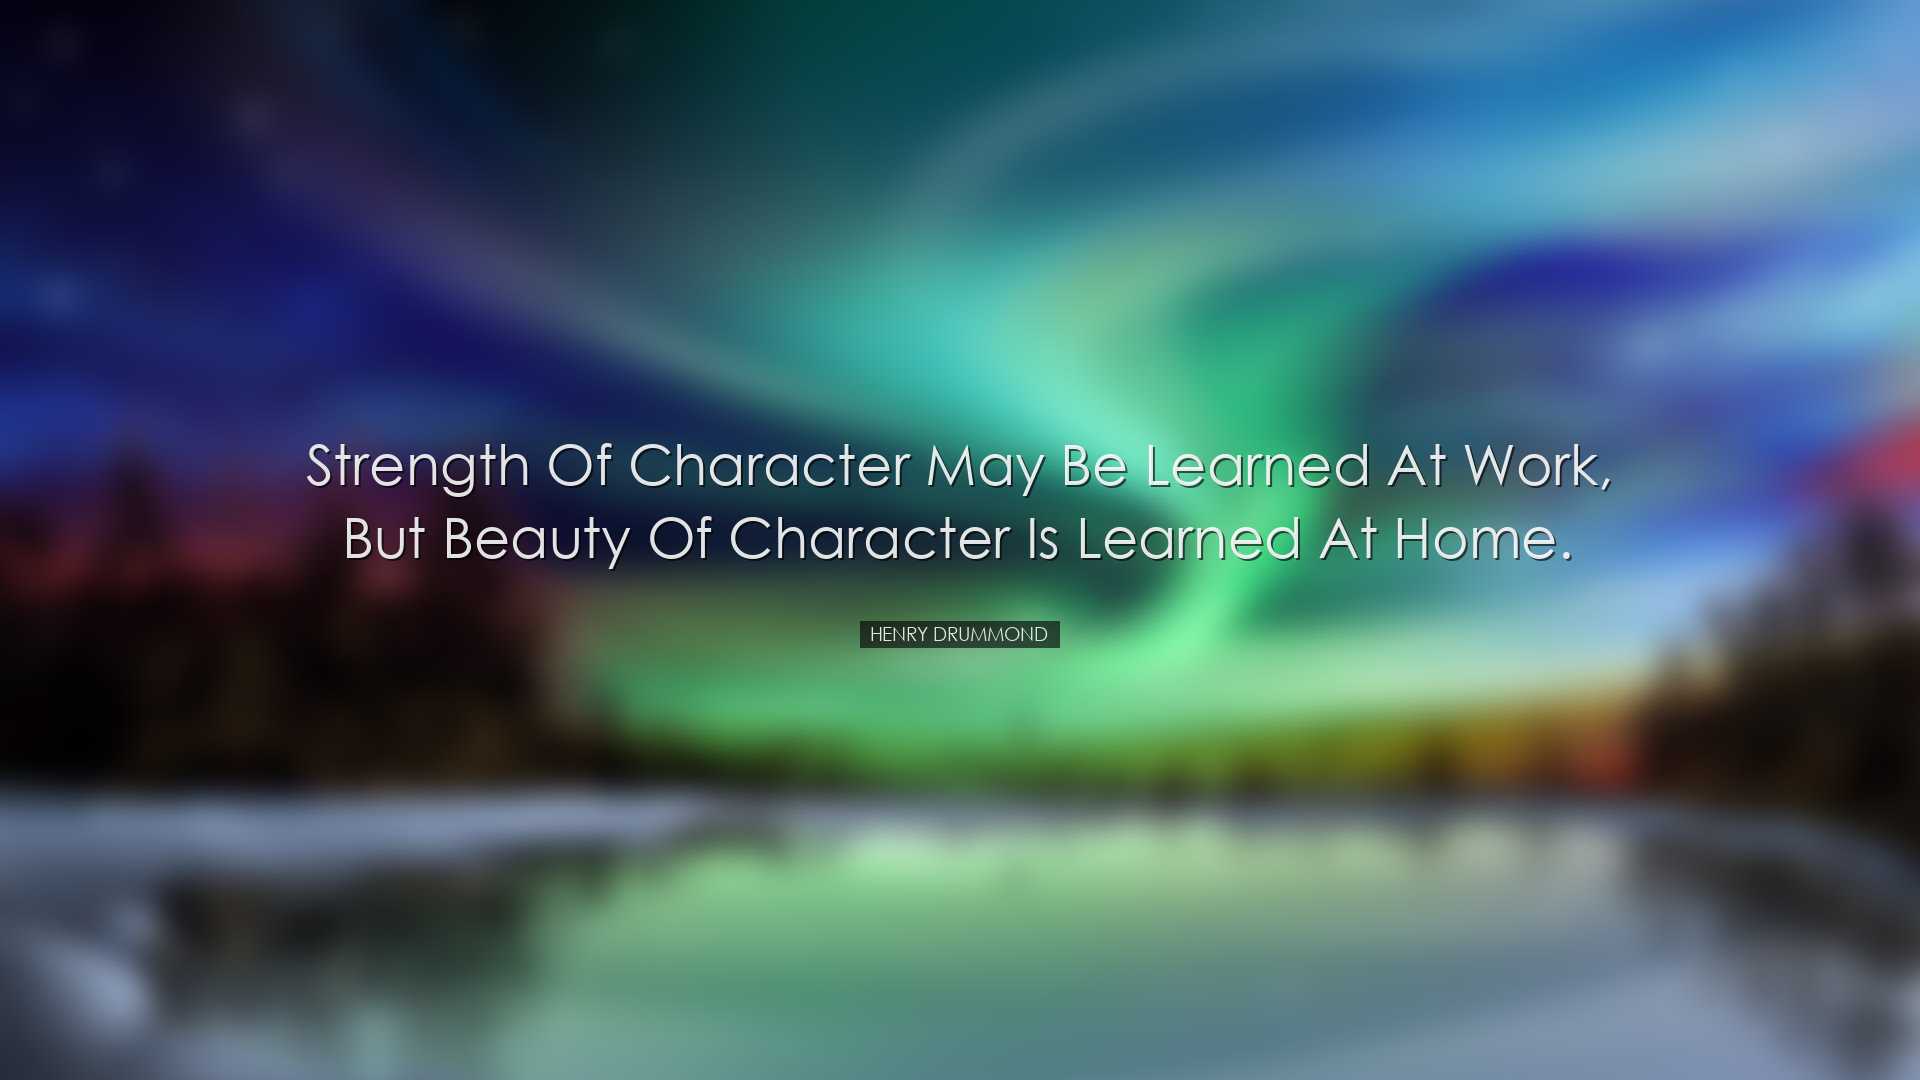 Strength of character may be learned at work, but beauty of charac